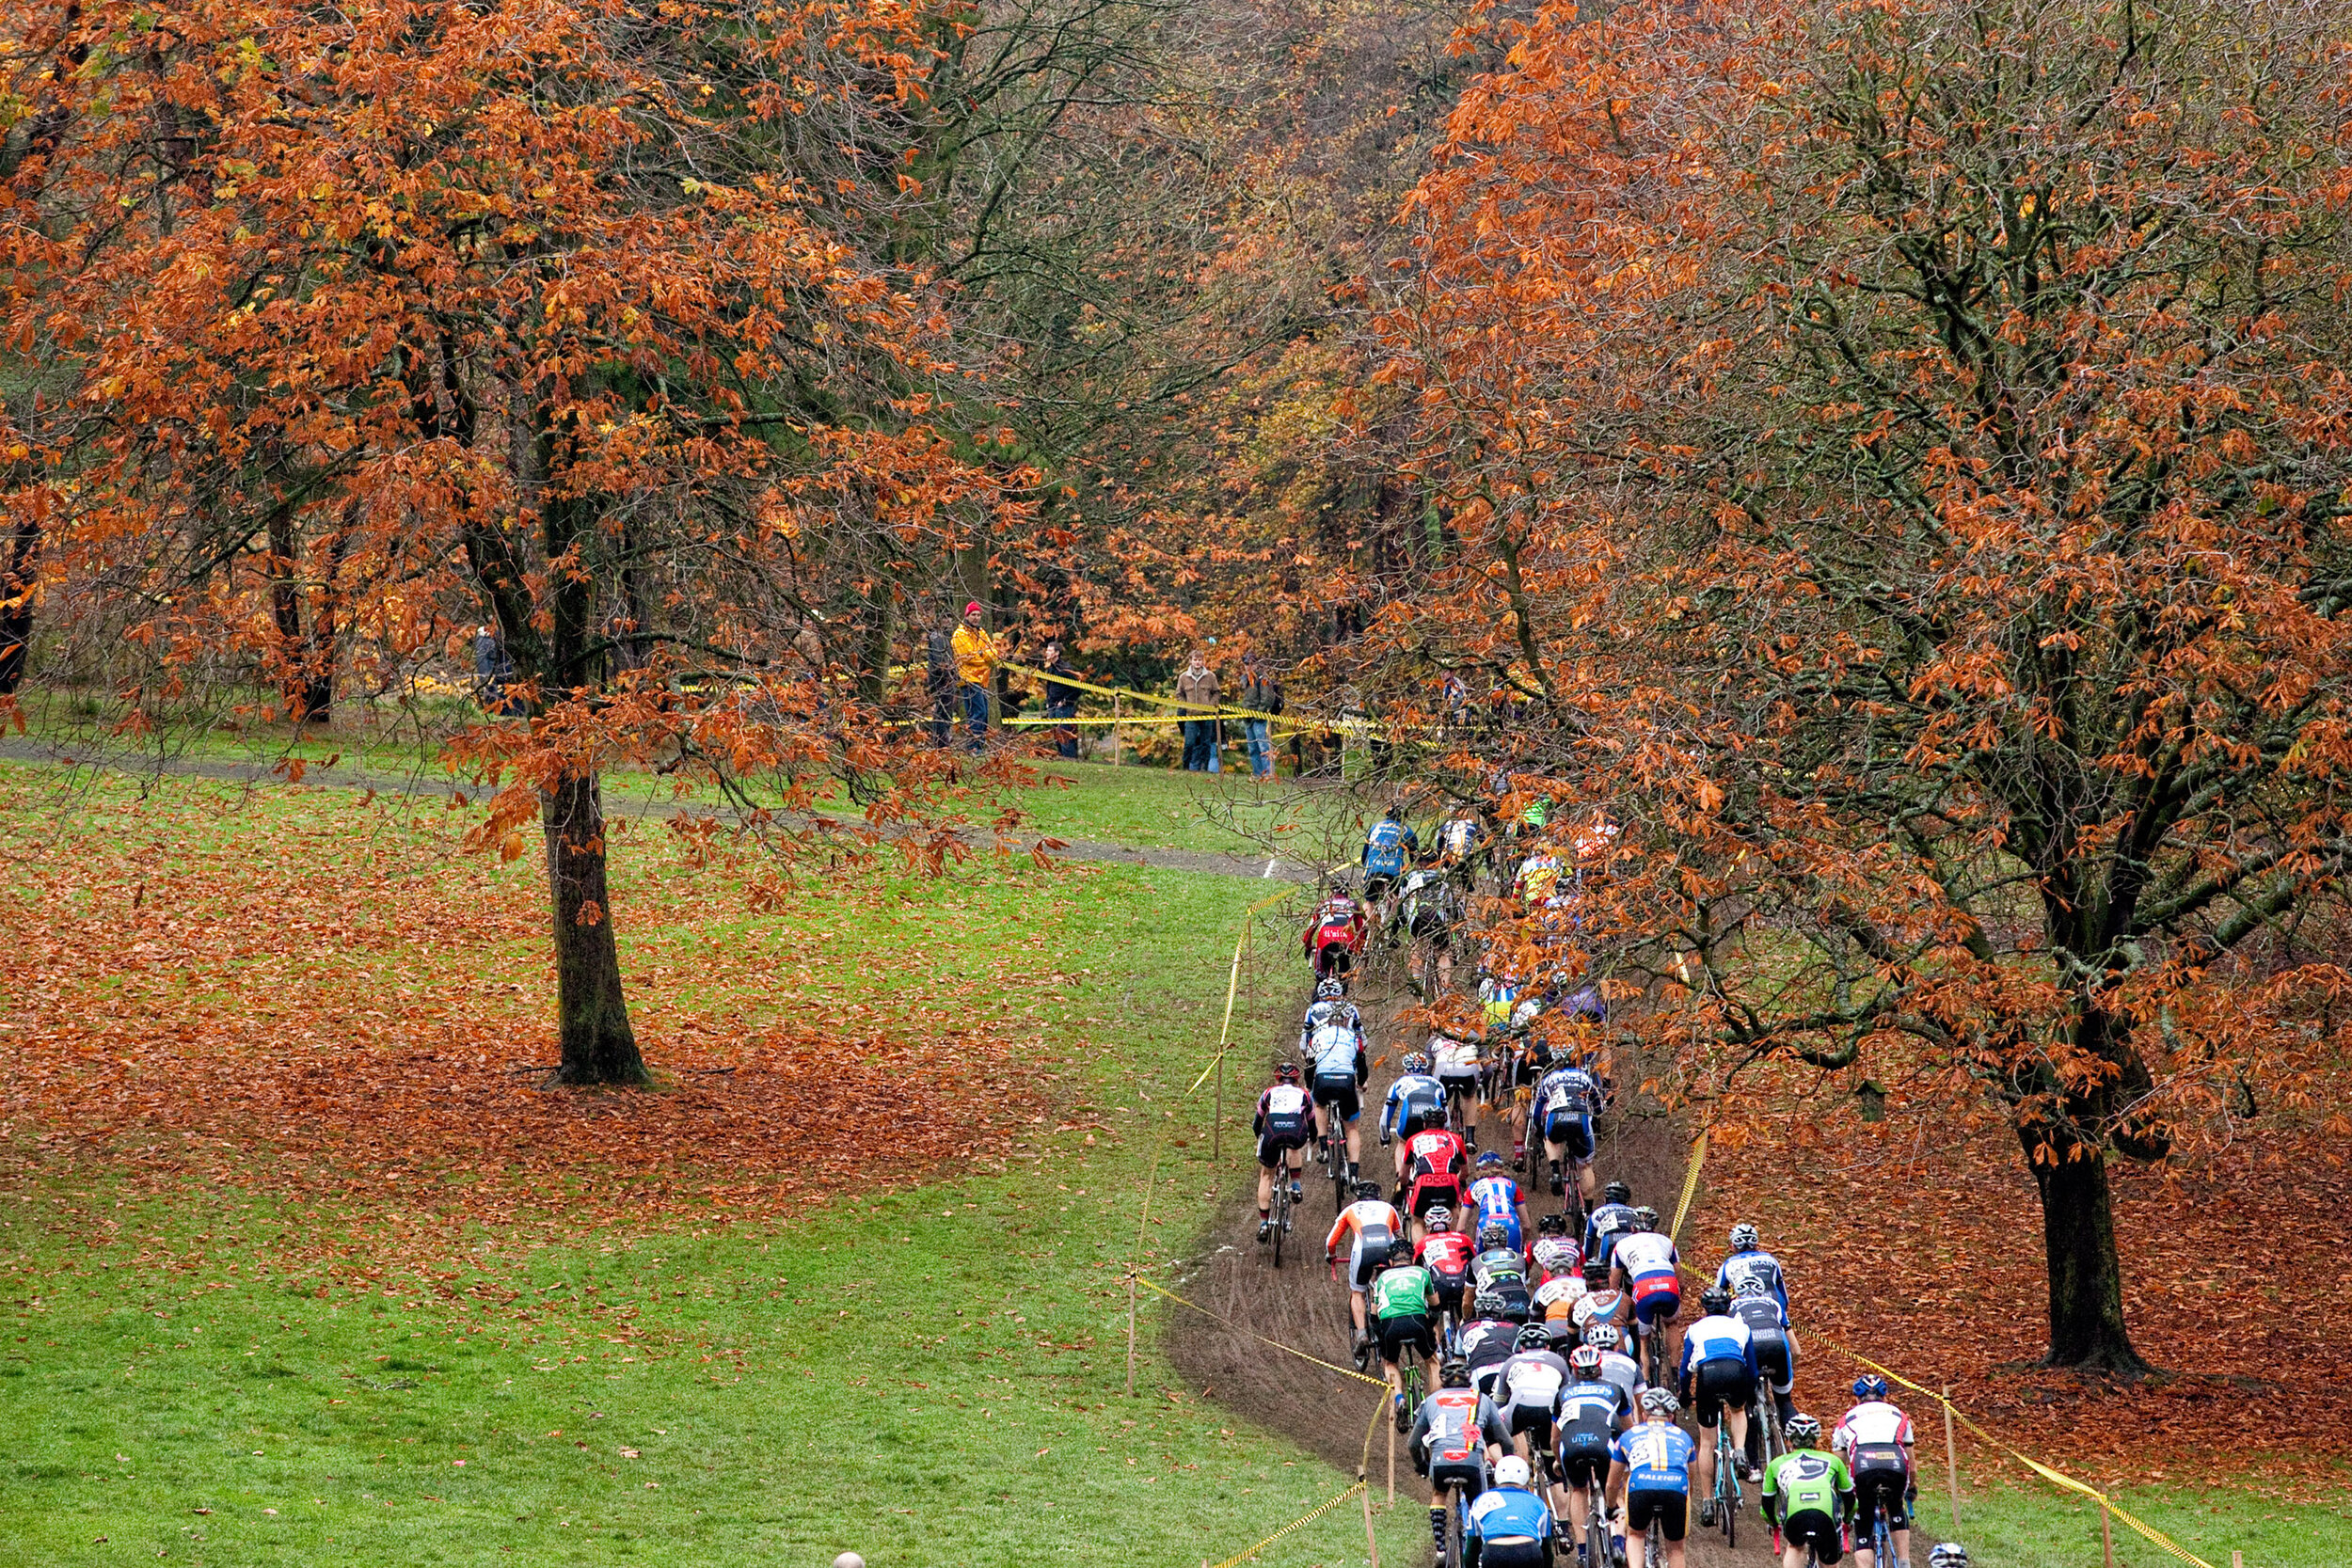  Competition: Cyclocross racers during a race, Washington 